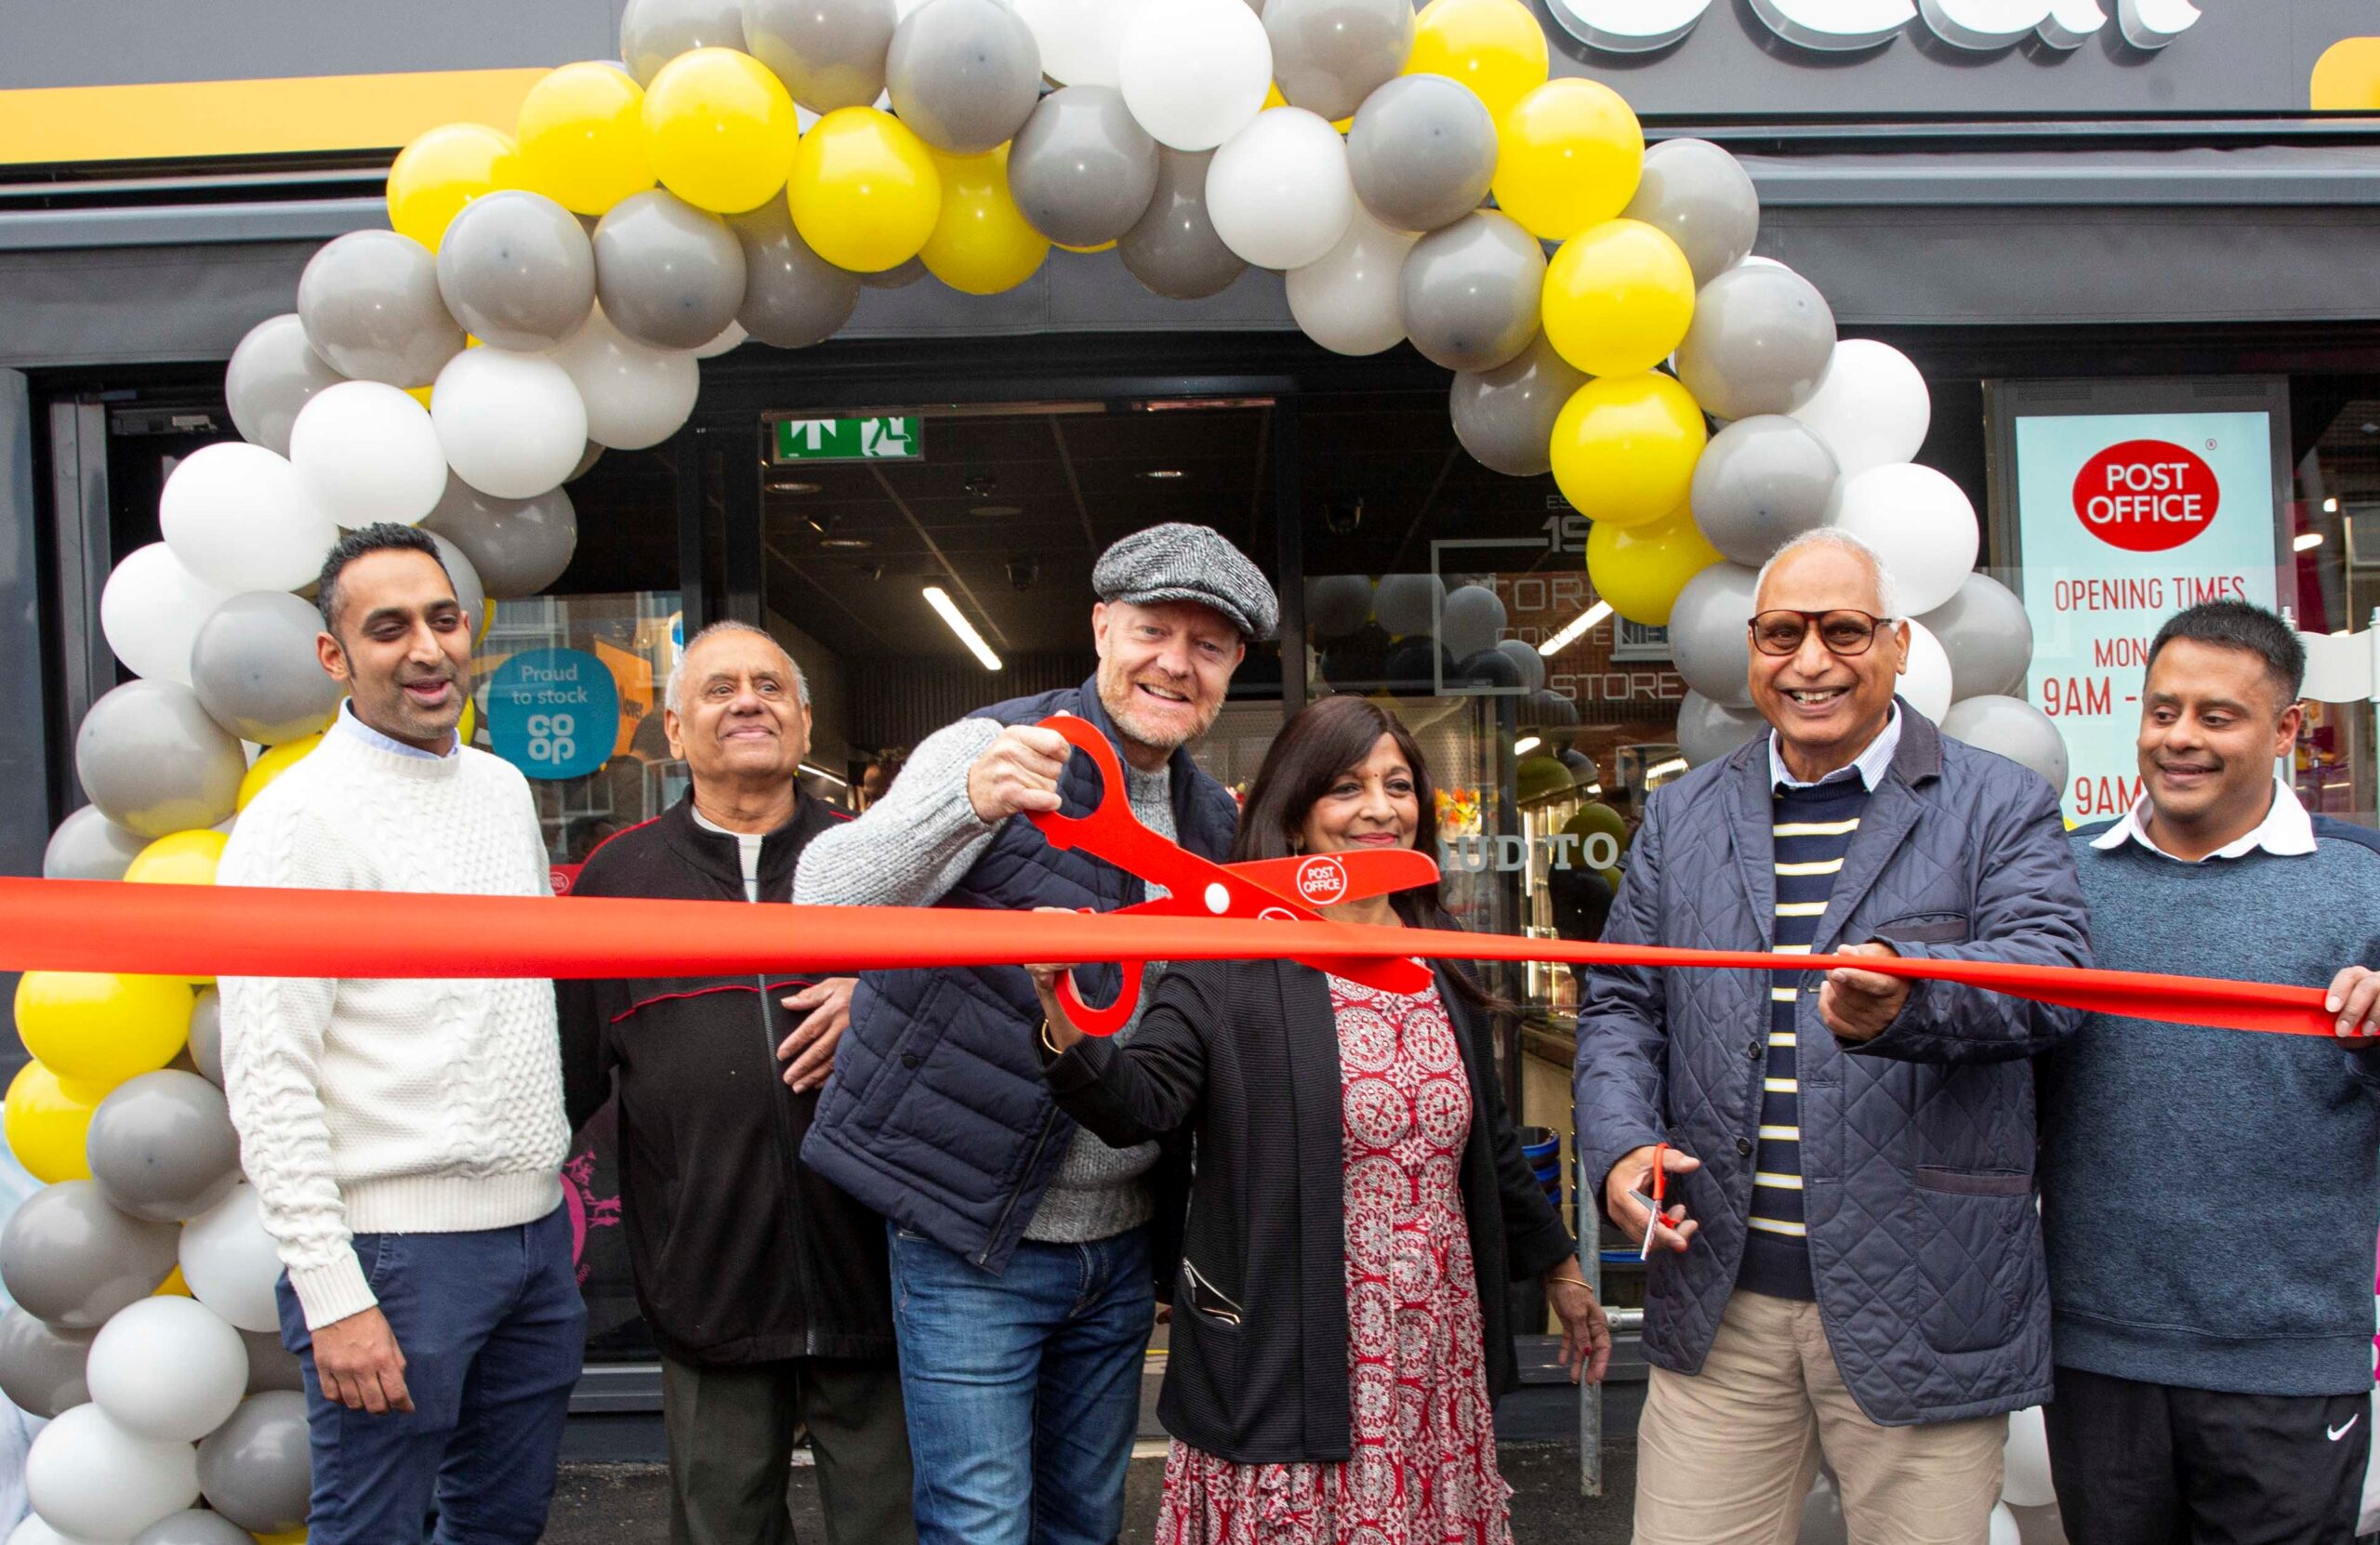 EastEnders star Jake Wood opens new-look post office in Catford – South London News